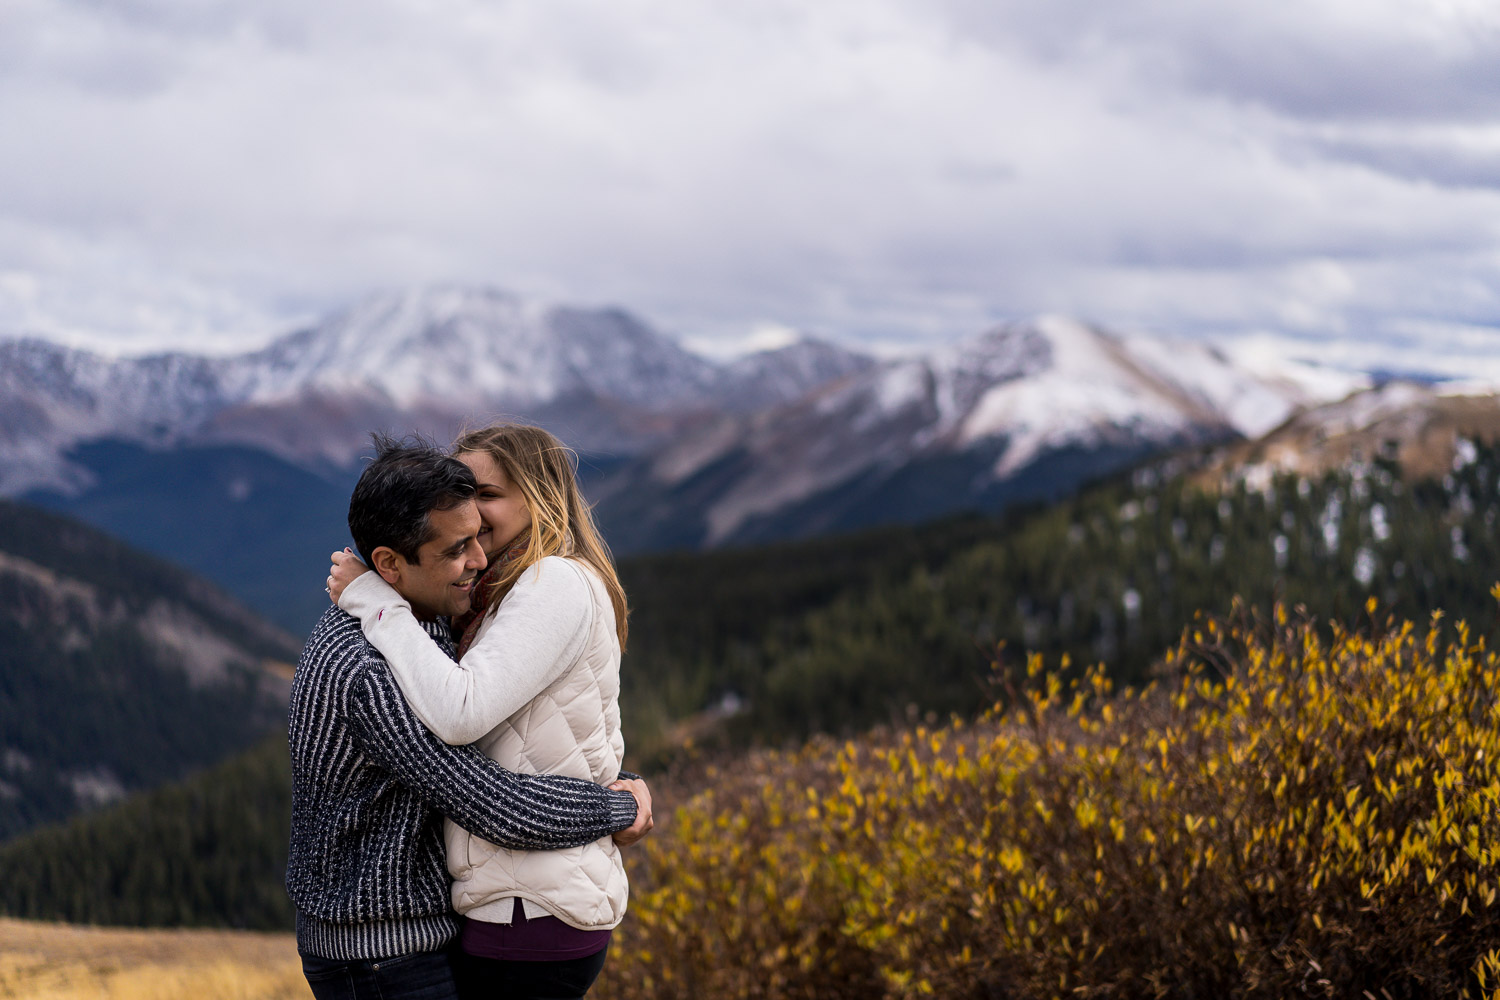 Maroon Bells Engagement Photos with mountain views